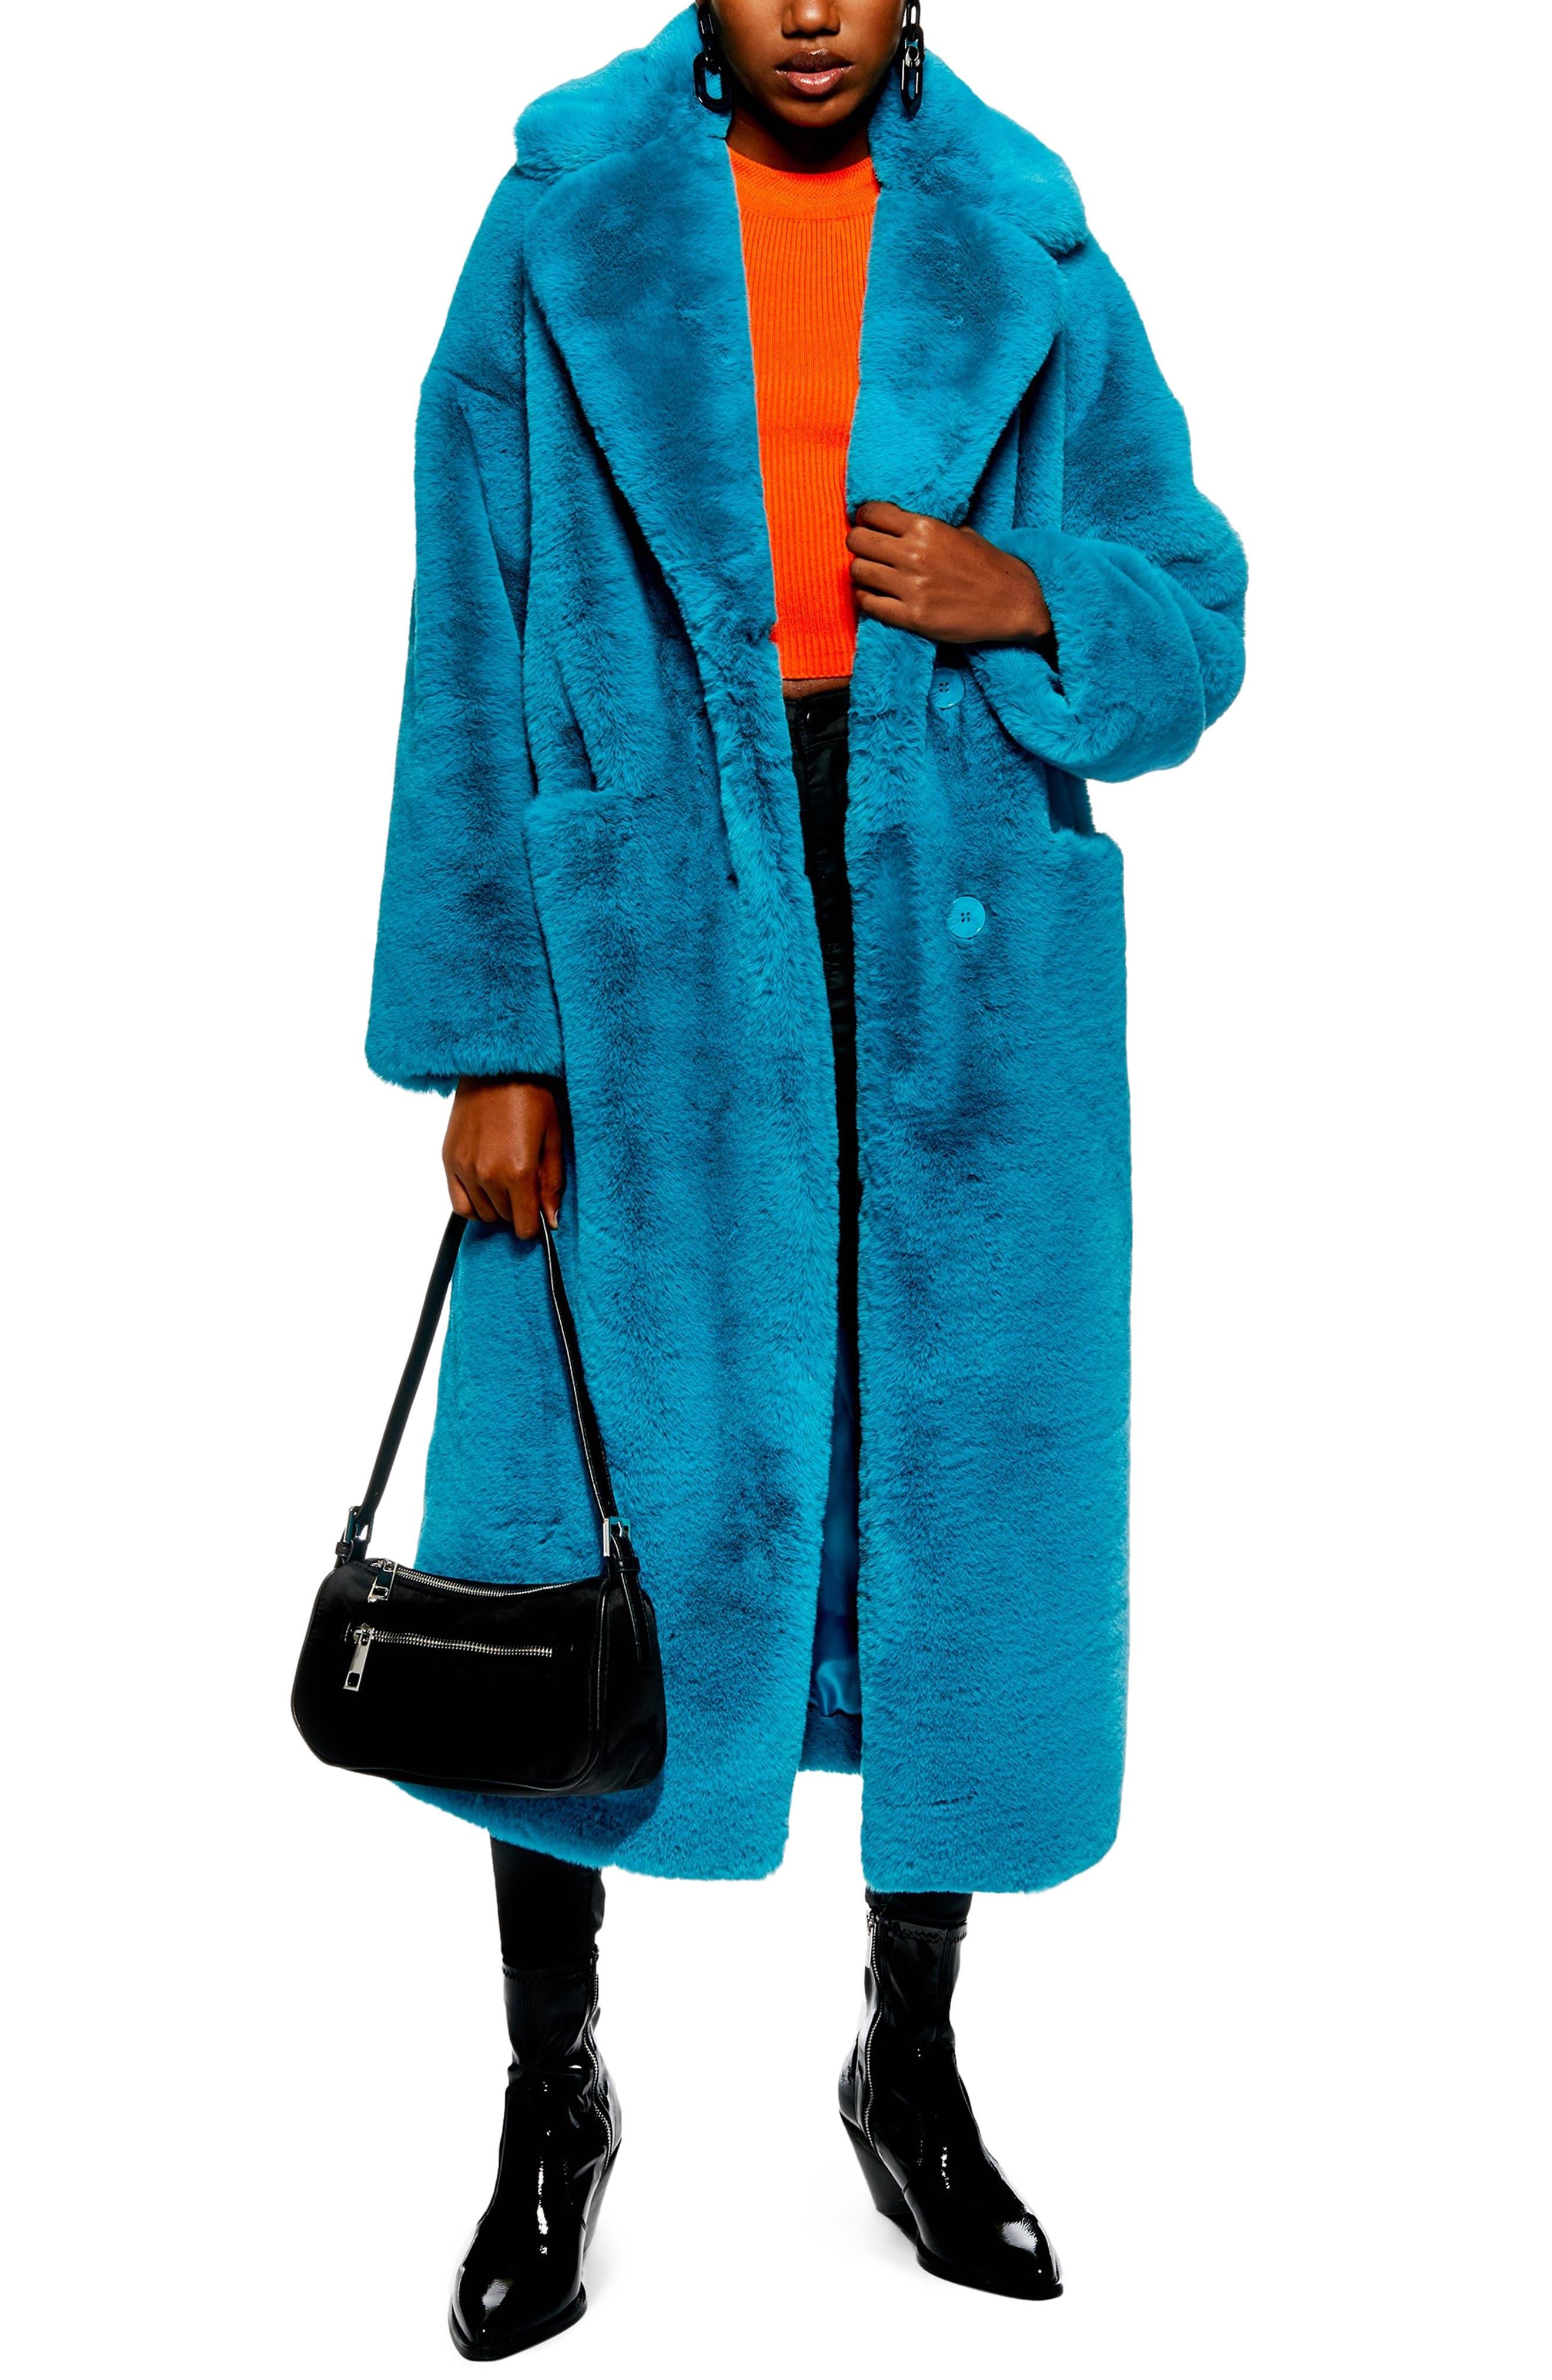 TOPSHOP Luxe Faux Fur Coat in Teal (Blue) - Lyst